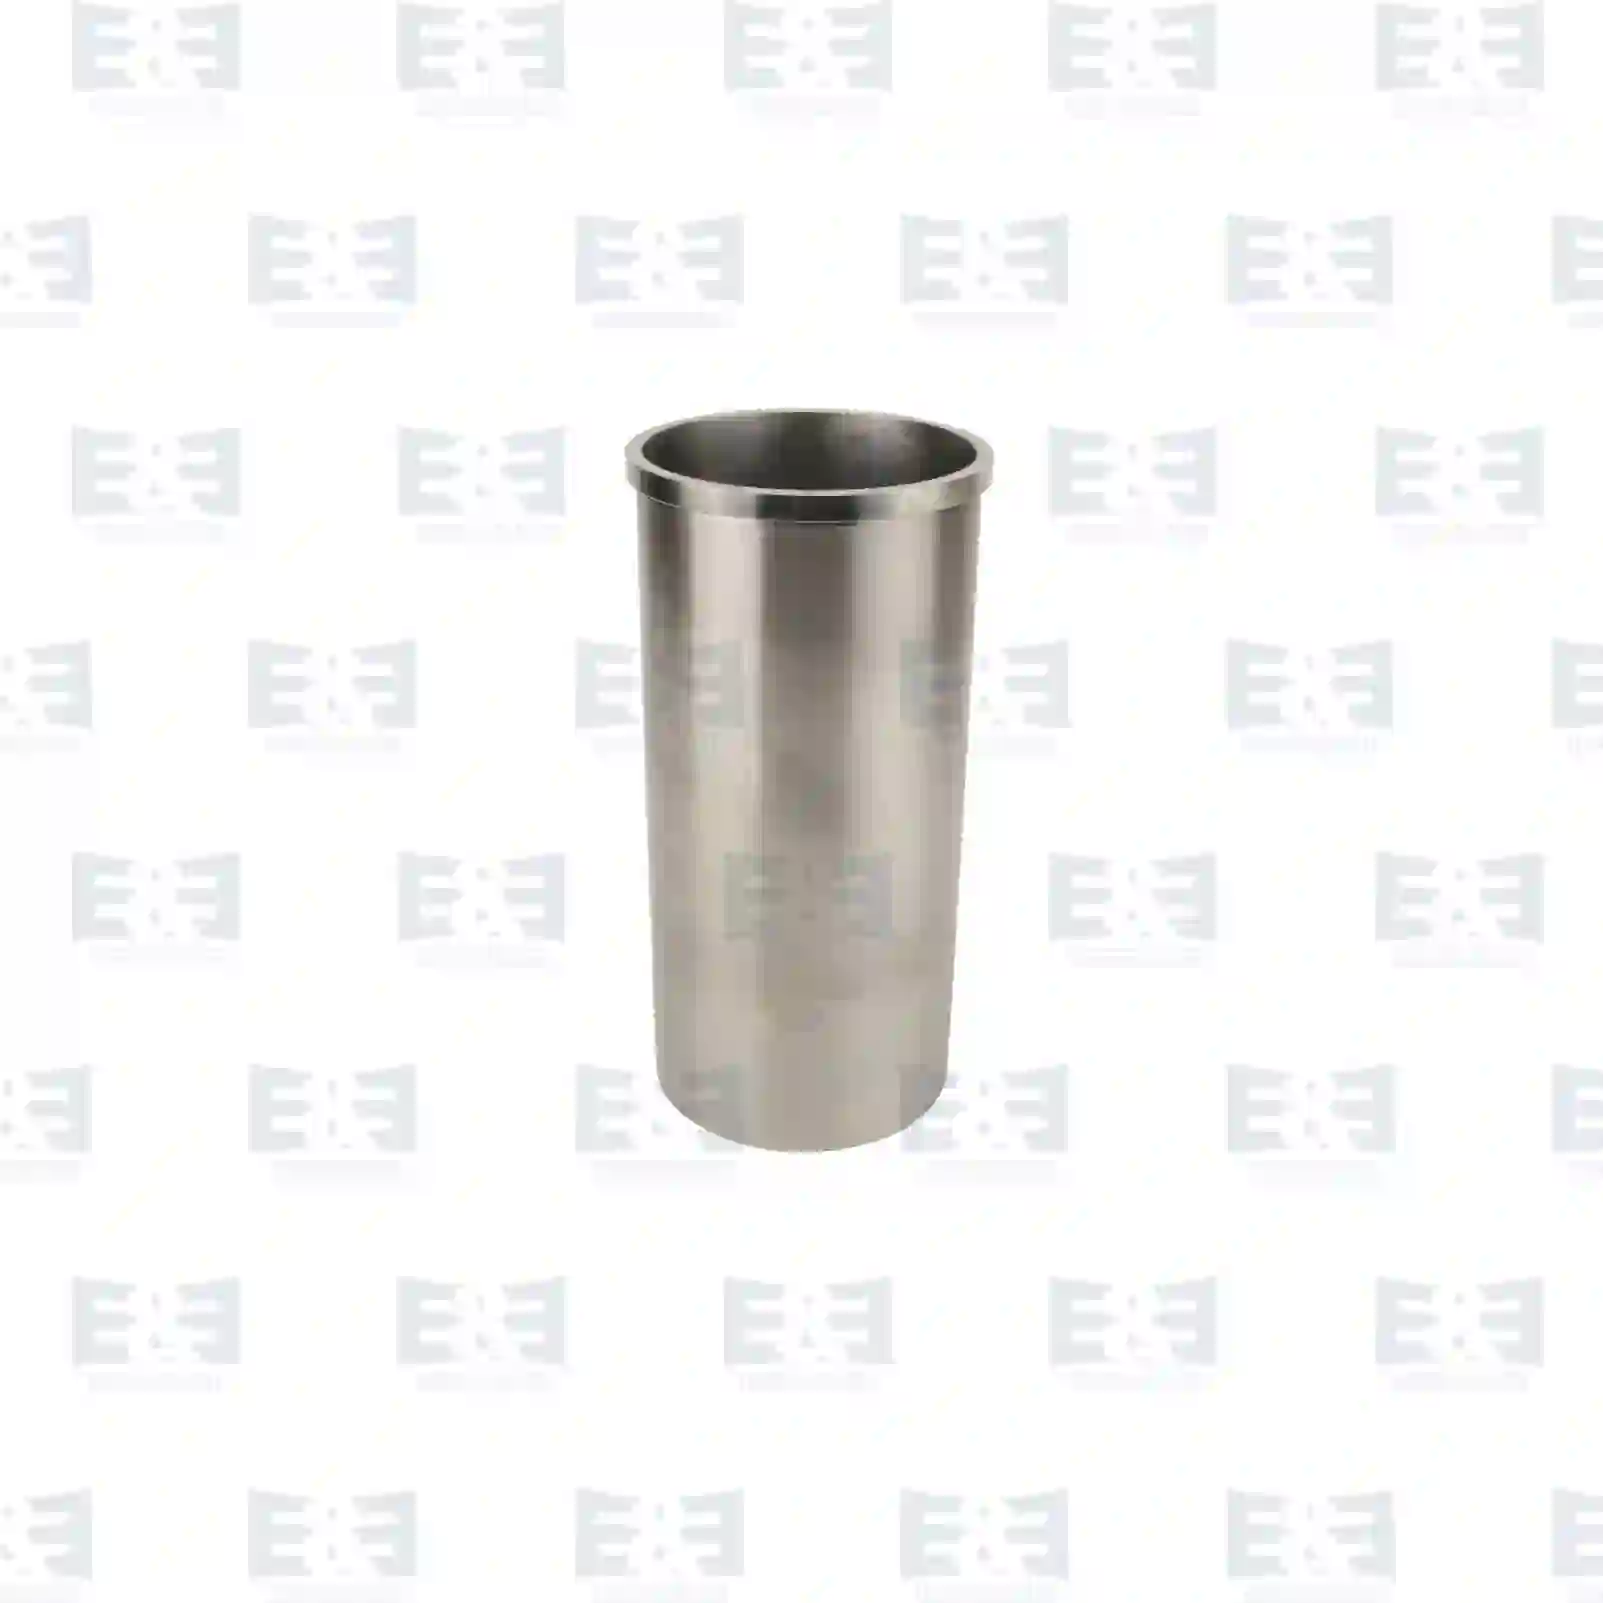 Cylinder liner, without seal rings, 2E2209017, 0241054, 0394080, 1699329, 241054, 256960, 394080, 396080, ZG01082-0008 ||  2E2209017 E&E Truck Spare Parts | Truck Spare Parts, Auotomotive Spare Parts Cylinder liner, without seal rings, 2E2209017, 0241054, 0394080, 1699329, 241054, 256960, 394080, 396080, ZG01082-0008 ||  2E2209017 E&E Truck Spare Parts | Truck Spare Parts, Auotomotive Spare Parts